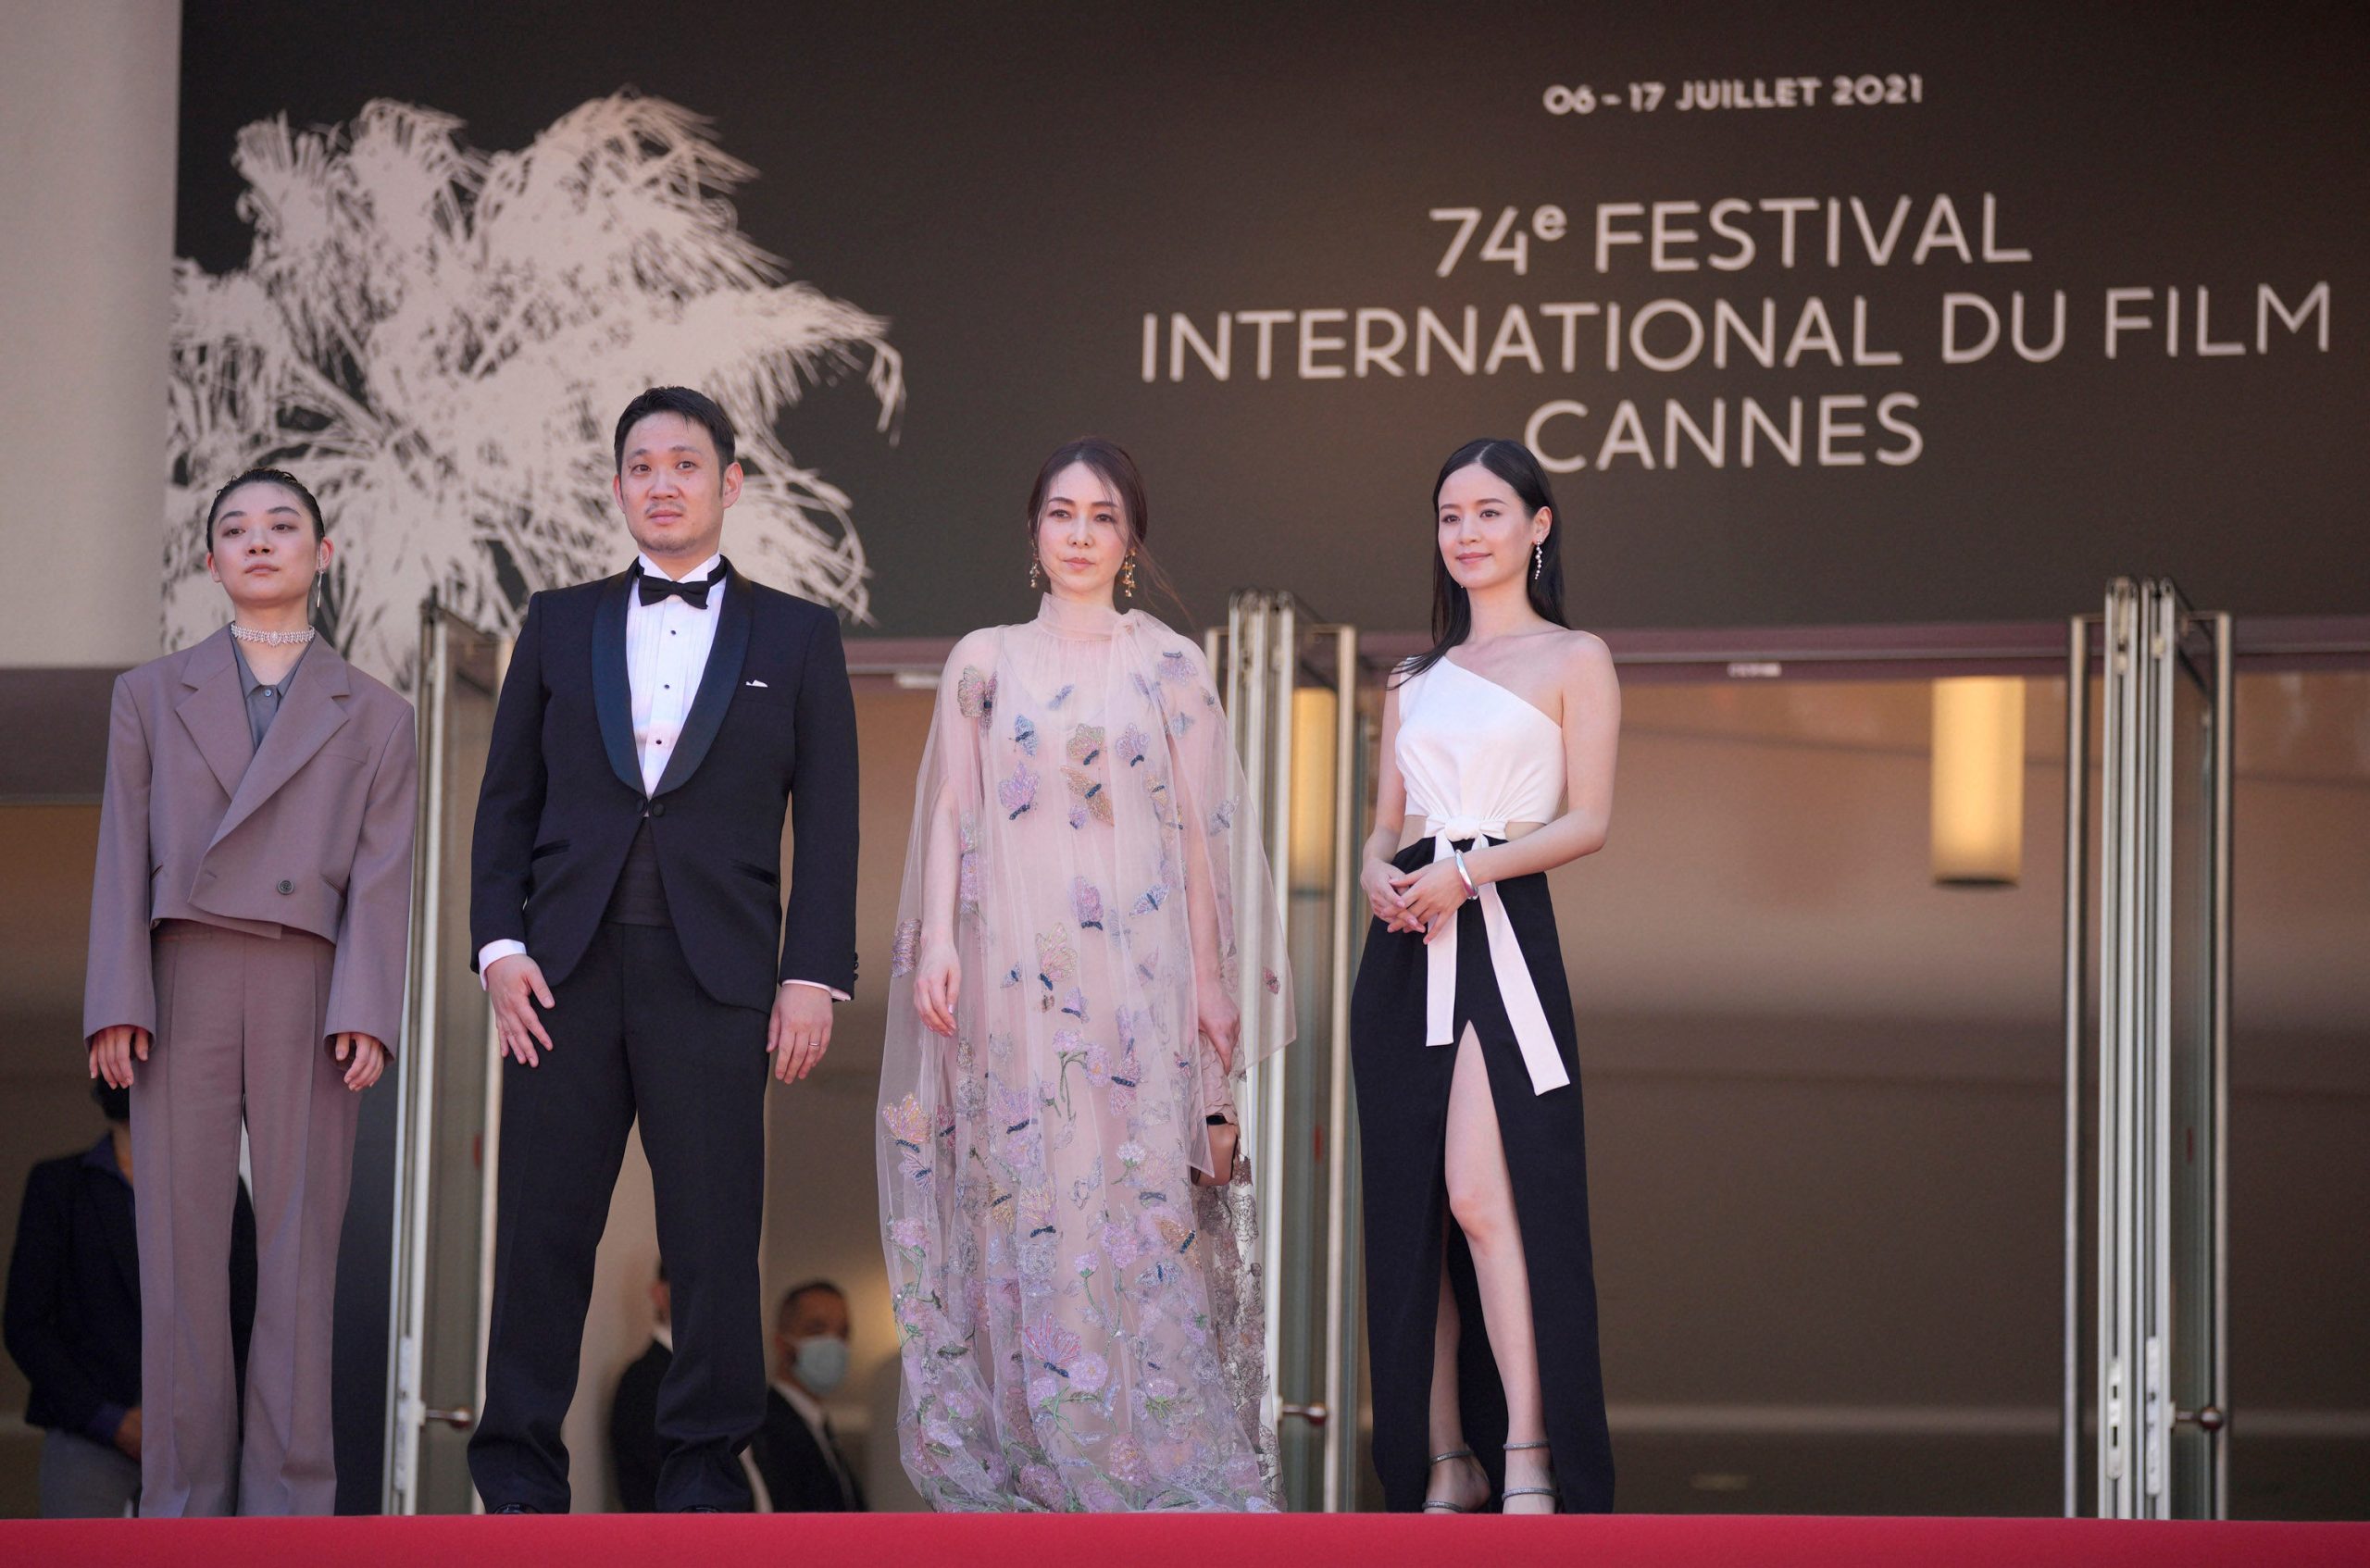 Cannes wraps up with ‘Titane’ winning Palme d’Or; see full list of winners